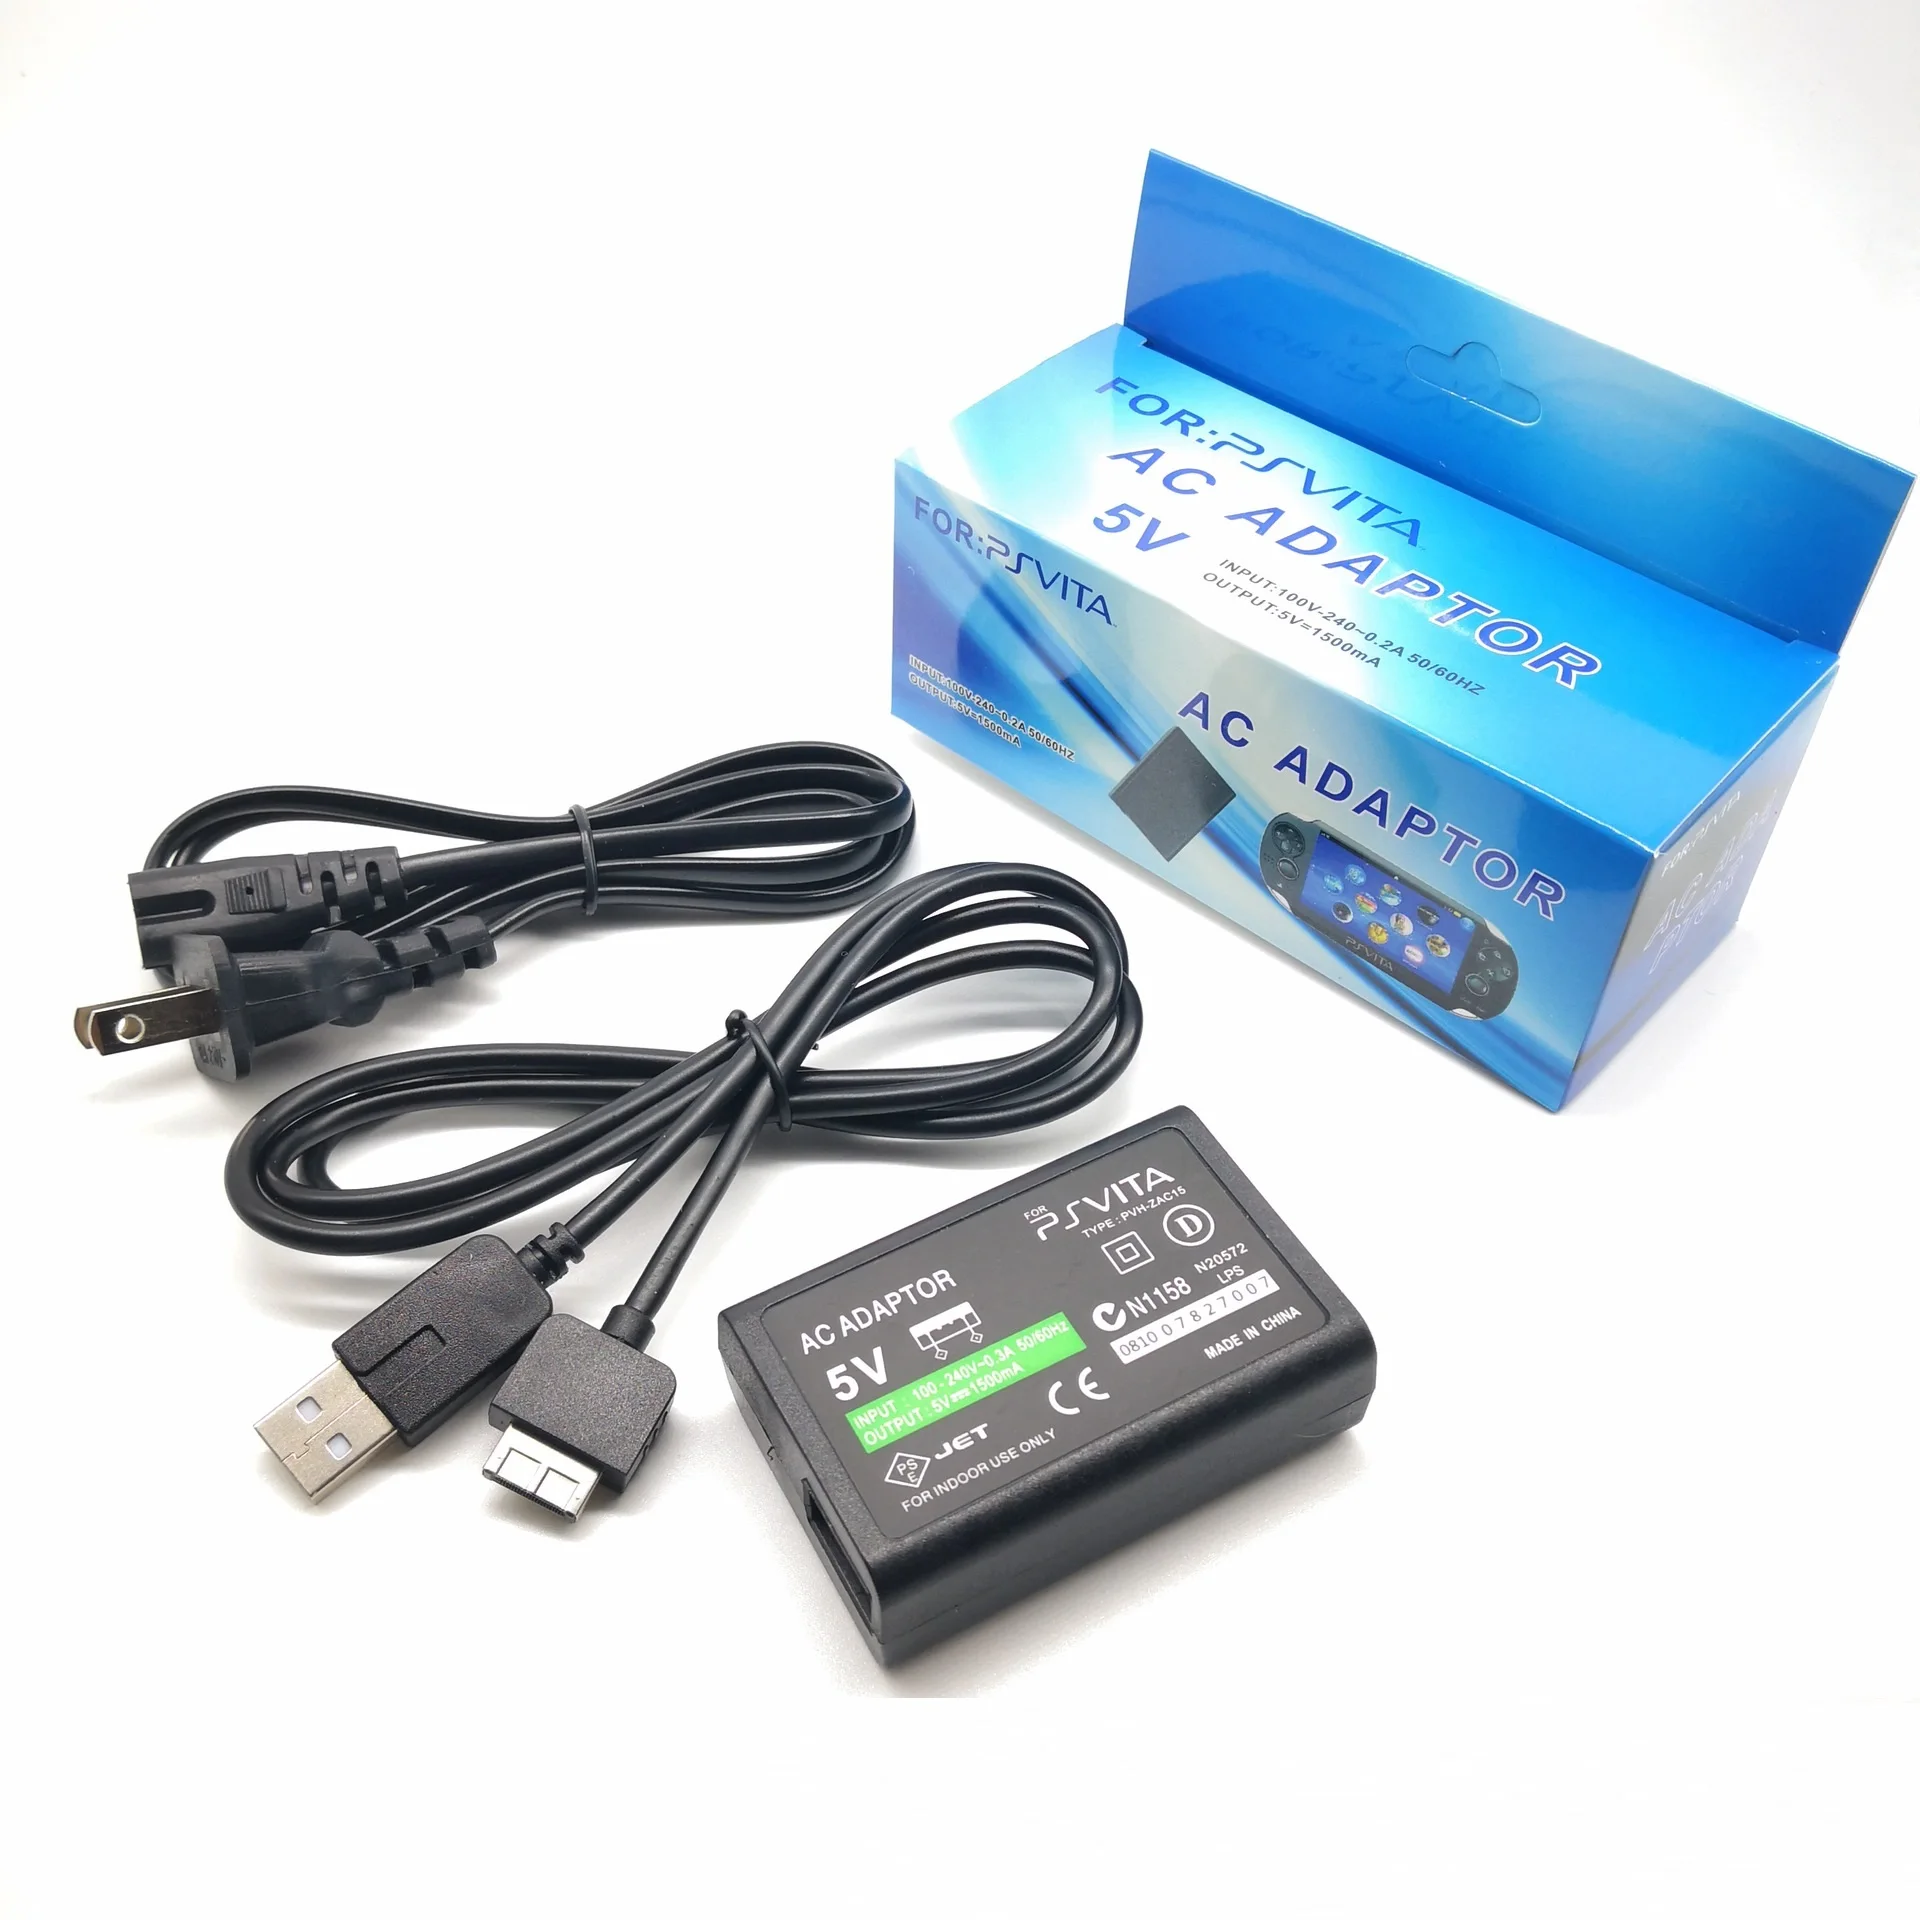 hensigt vaccination kupon Wholesale For PS VITA Charger AC Adapter Power Supply with Charging Cable  for PS VITA Game Console EU/US PLUG From m.alibaba.com